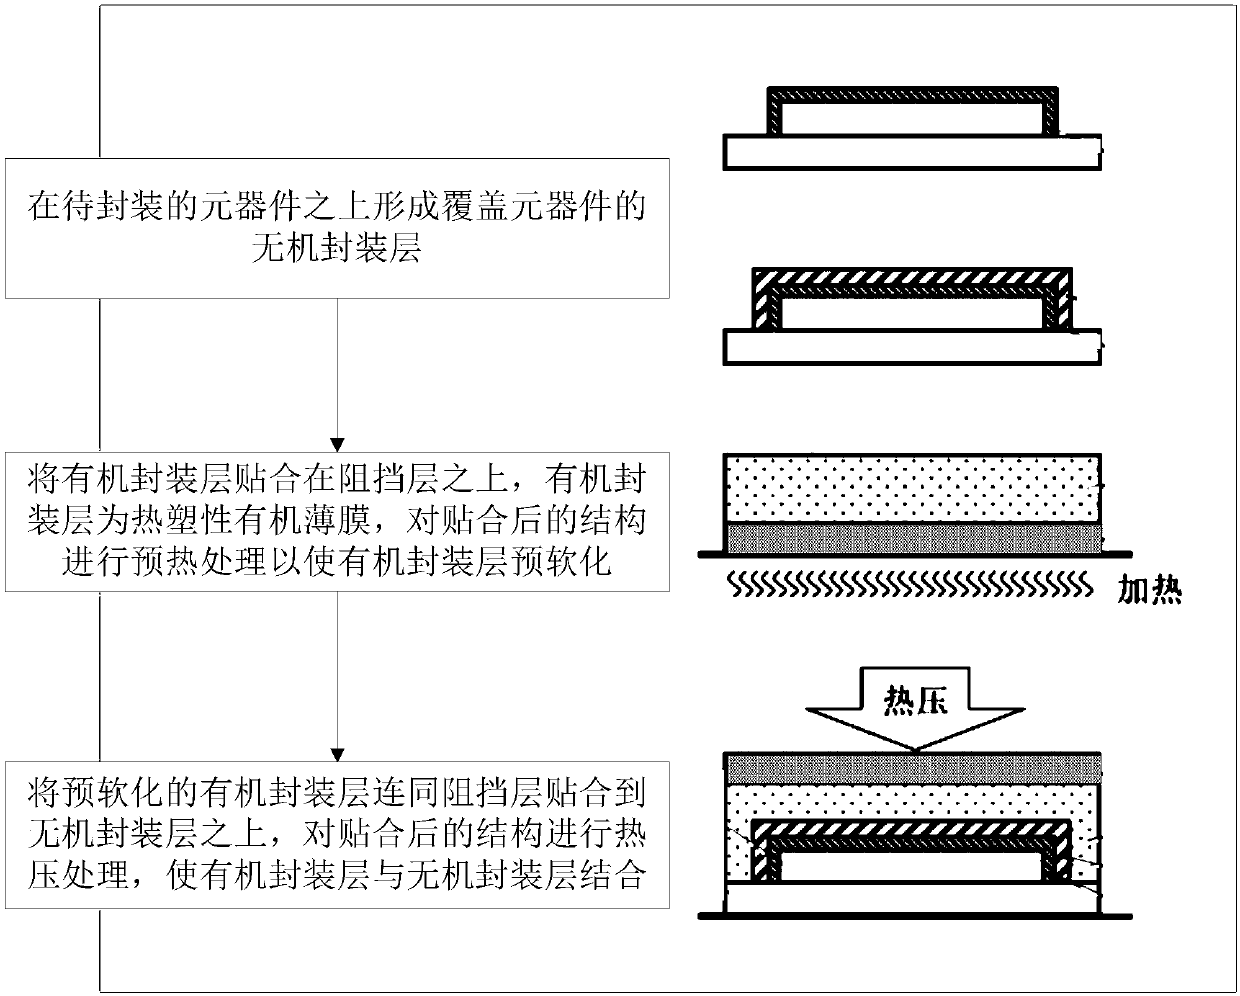 Thin film packaging structure, device packaging method and application